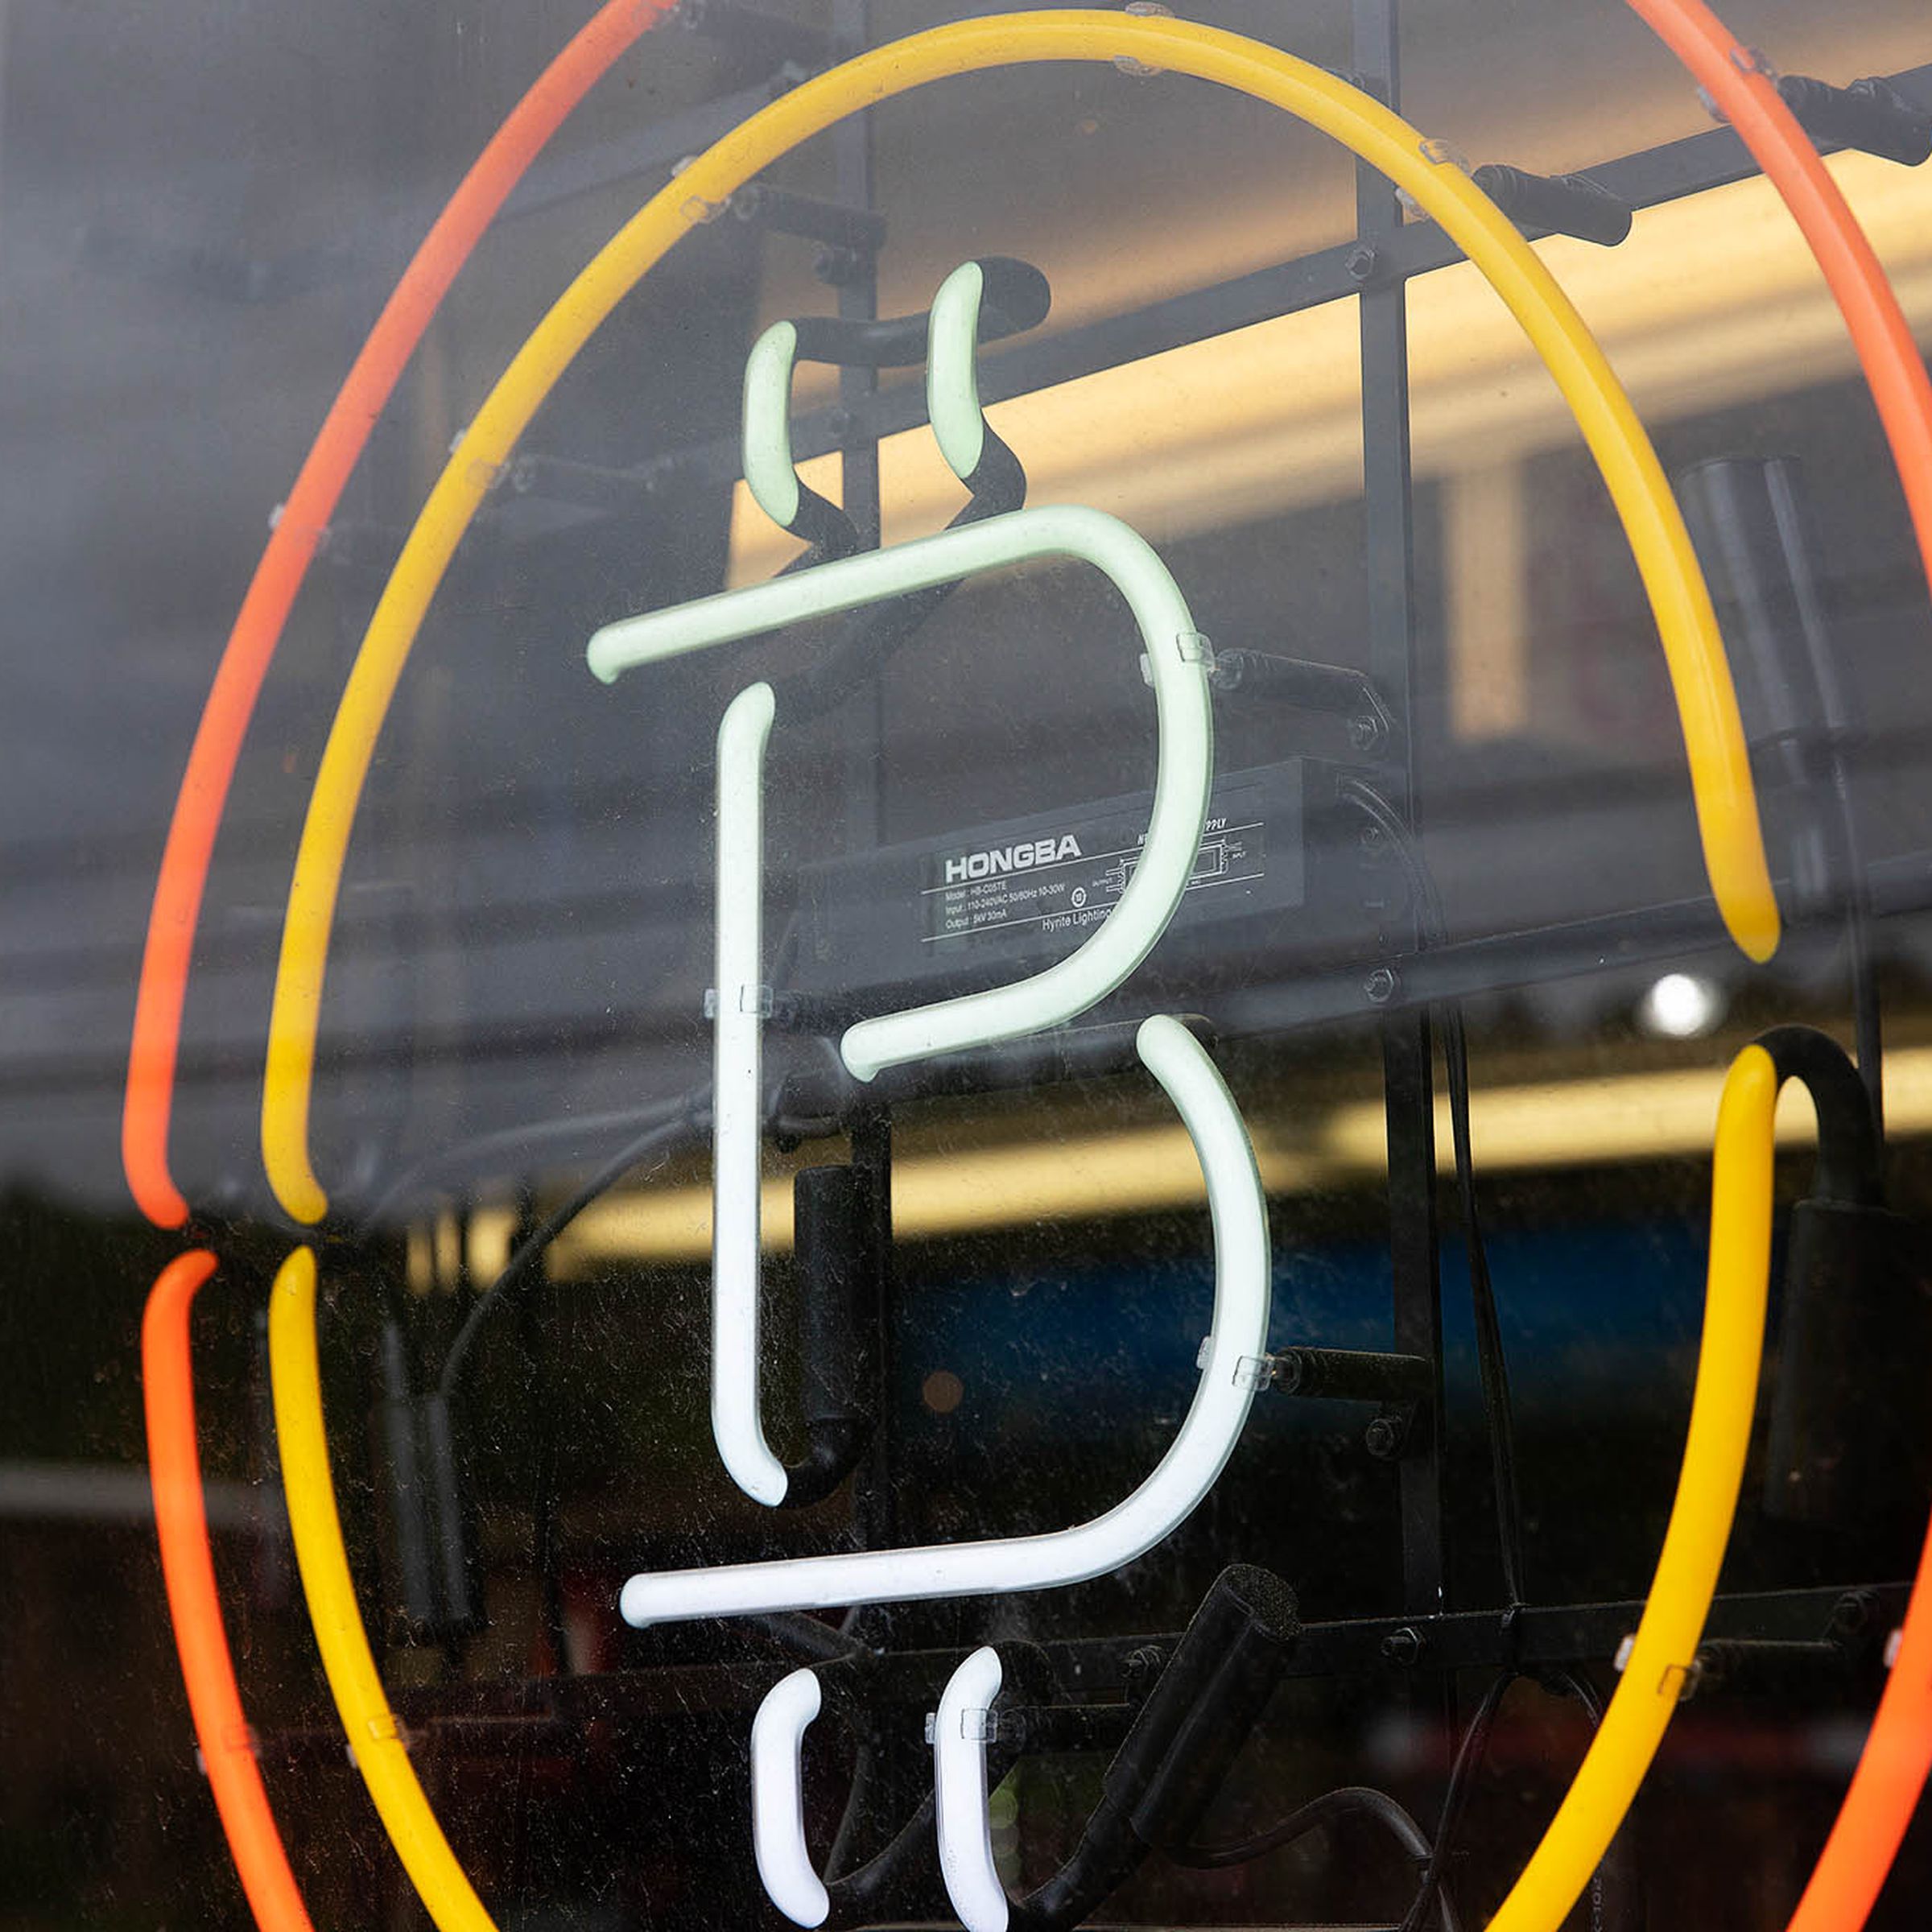 An image of the Bitcoin logo in a window